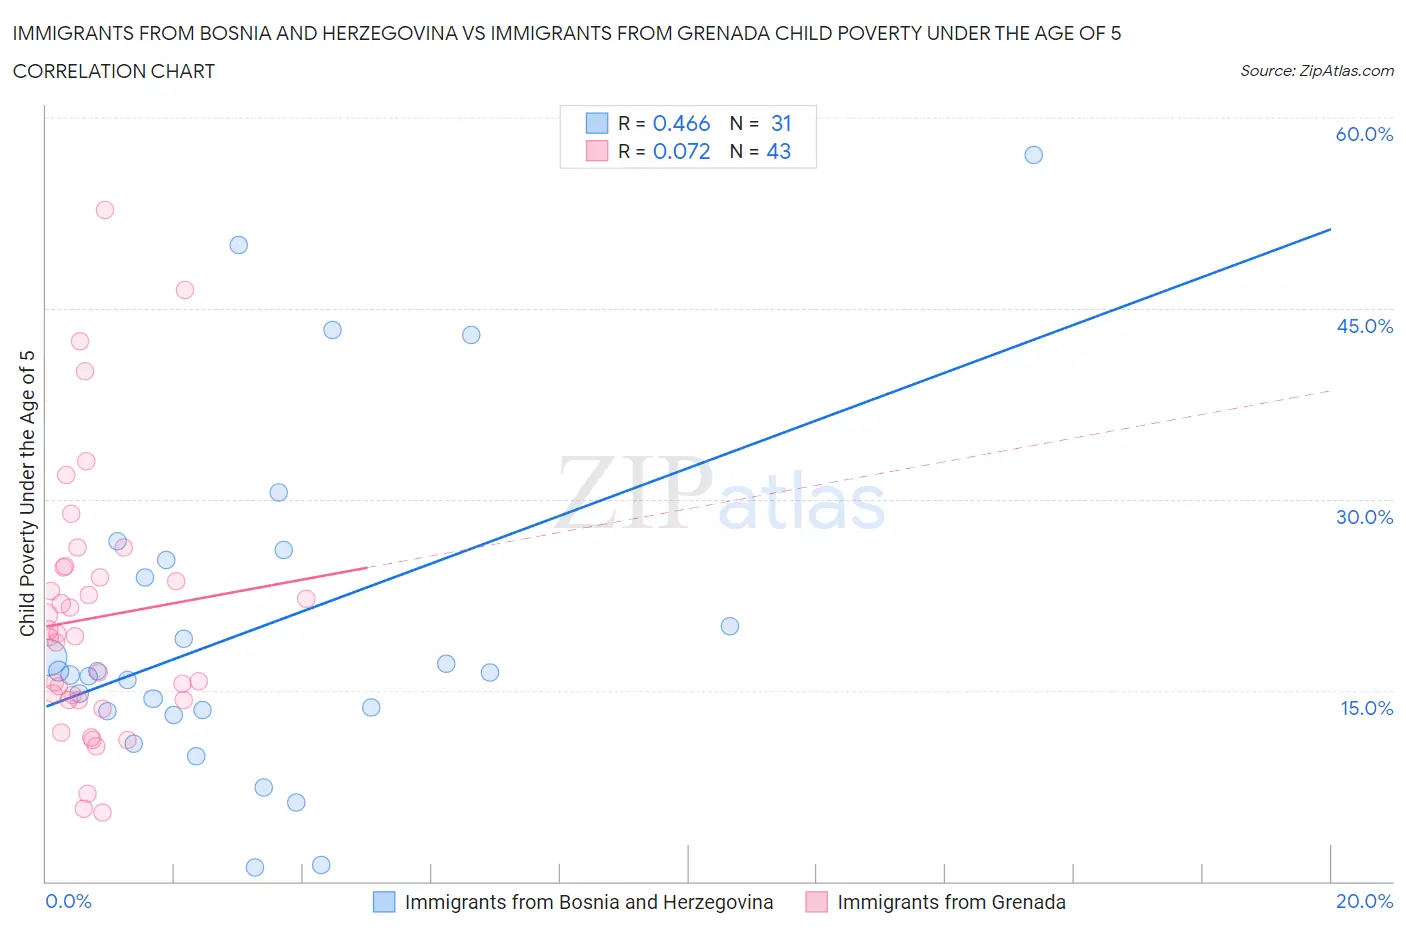 Immigrants from Bosnia and Herzegovina vs Immigrants from Grenada Child Poverty Under the Age of 5